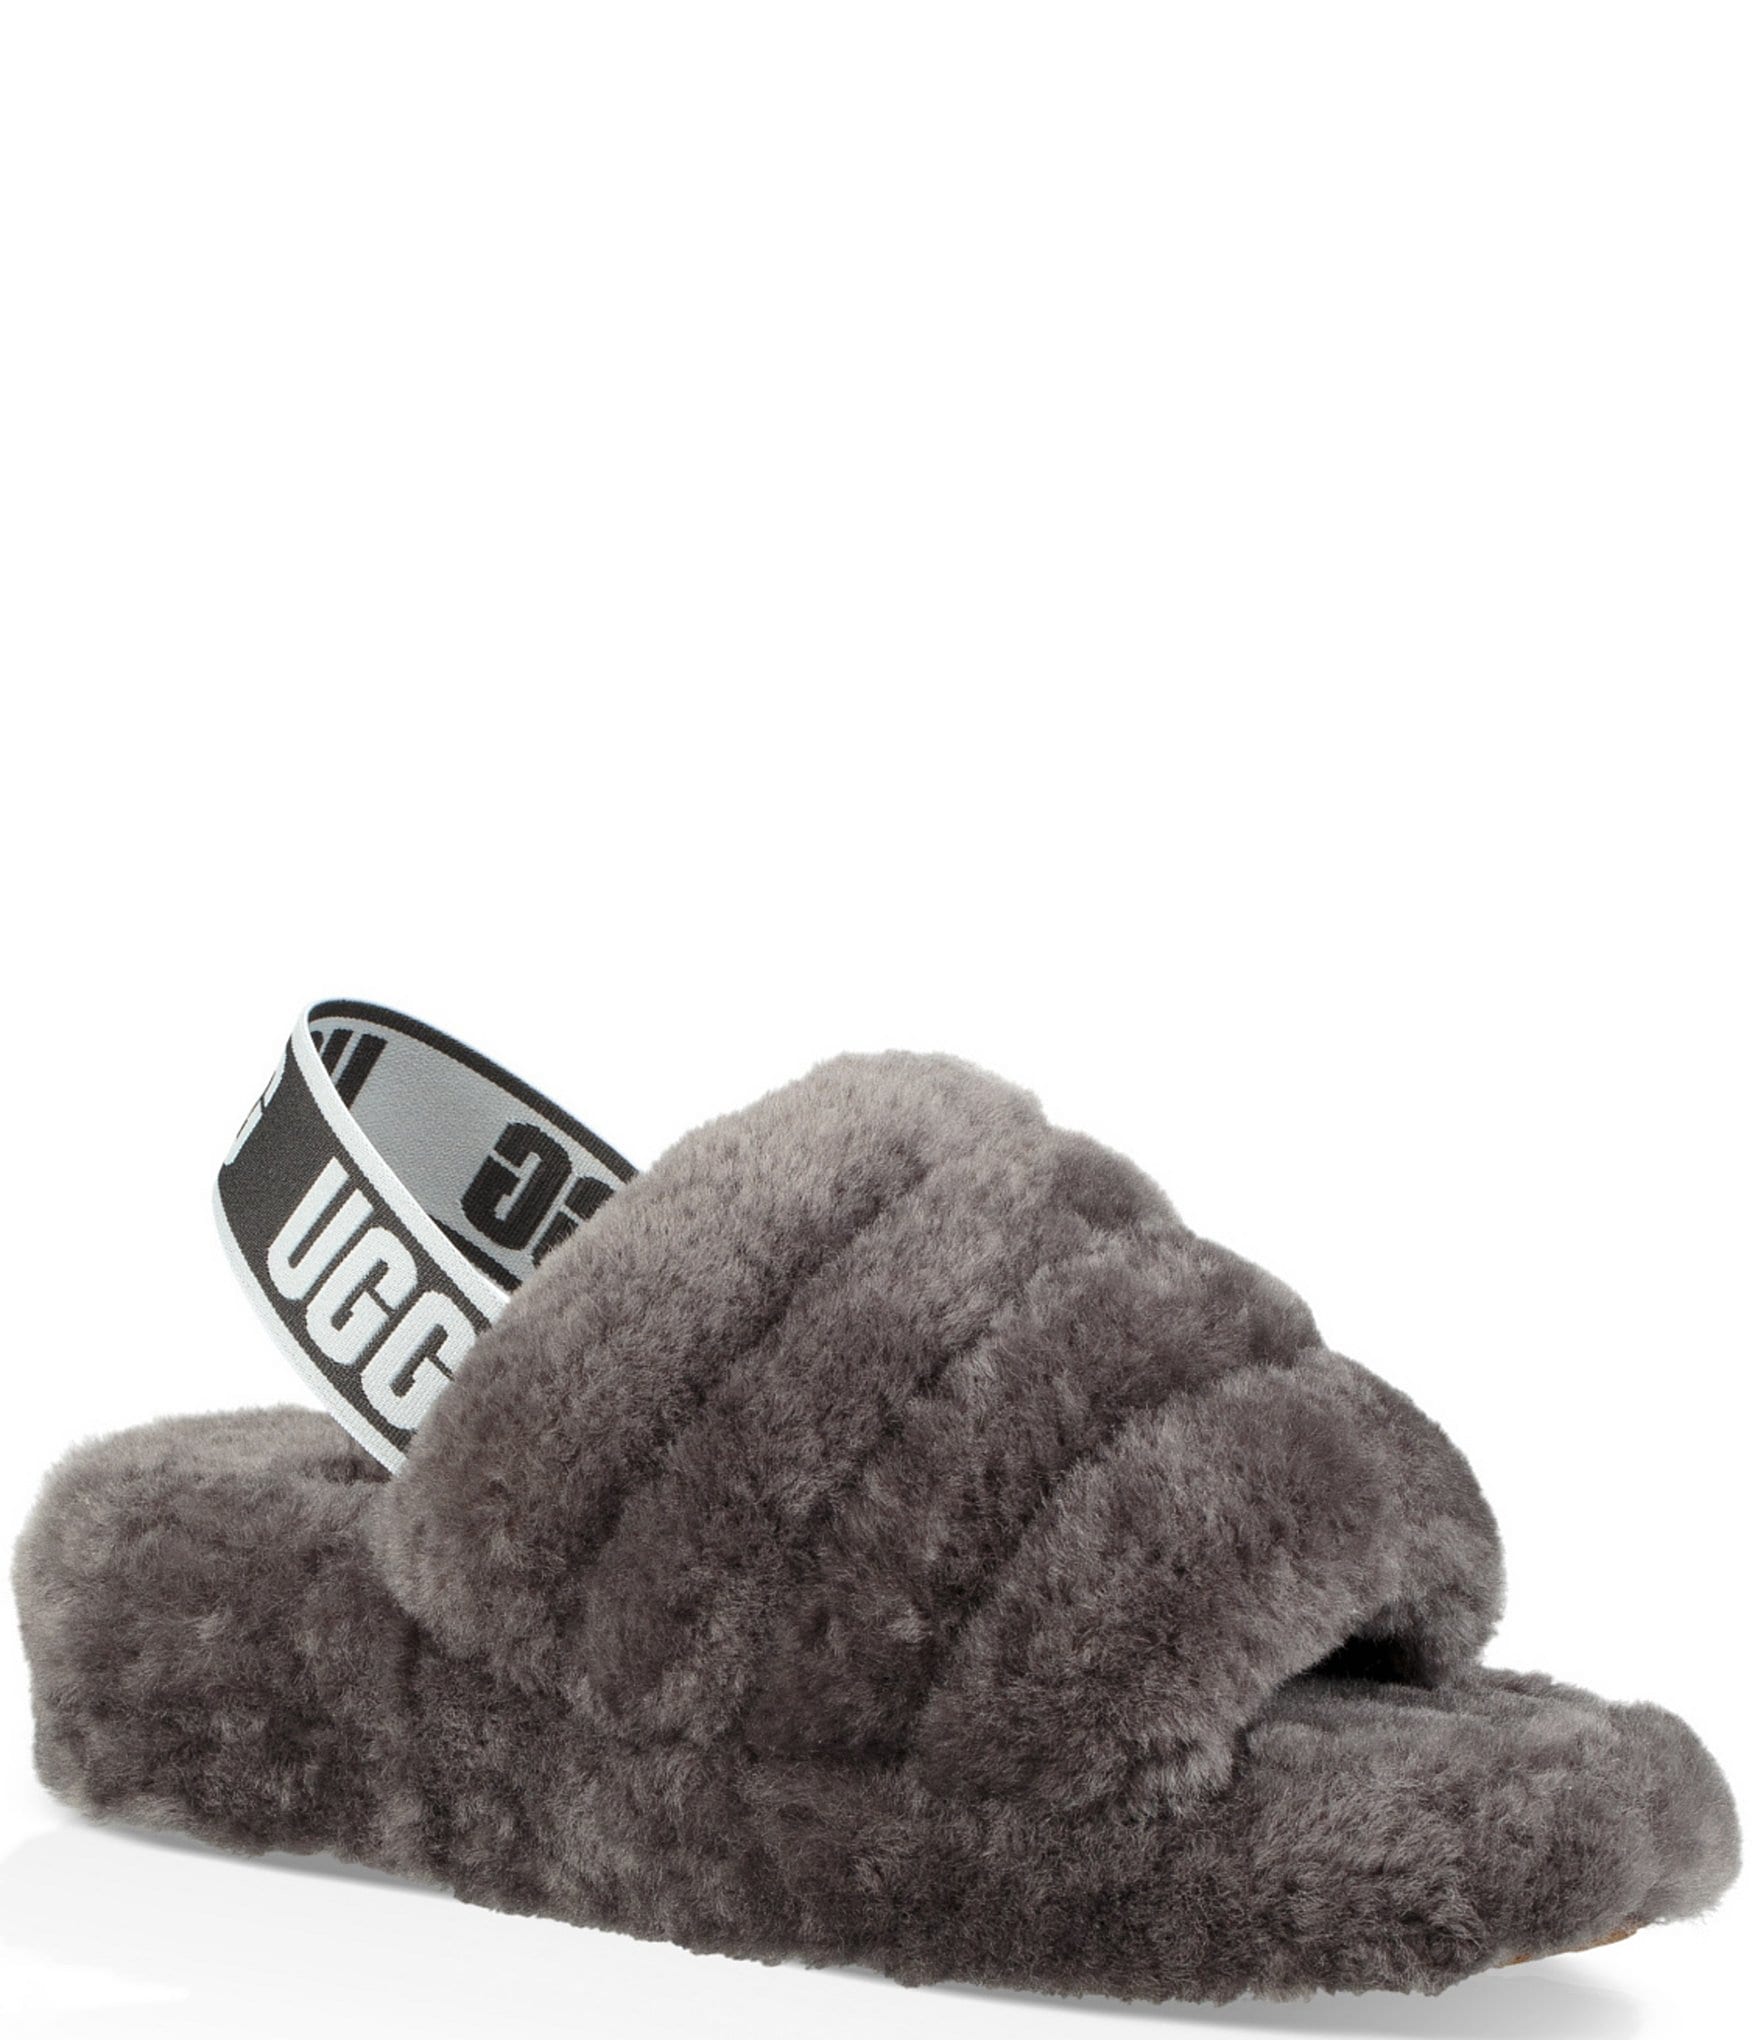 black and grey ugg slippers